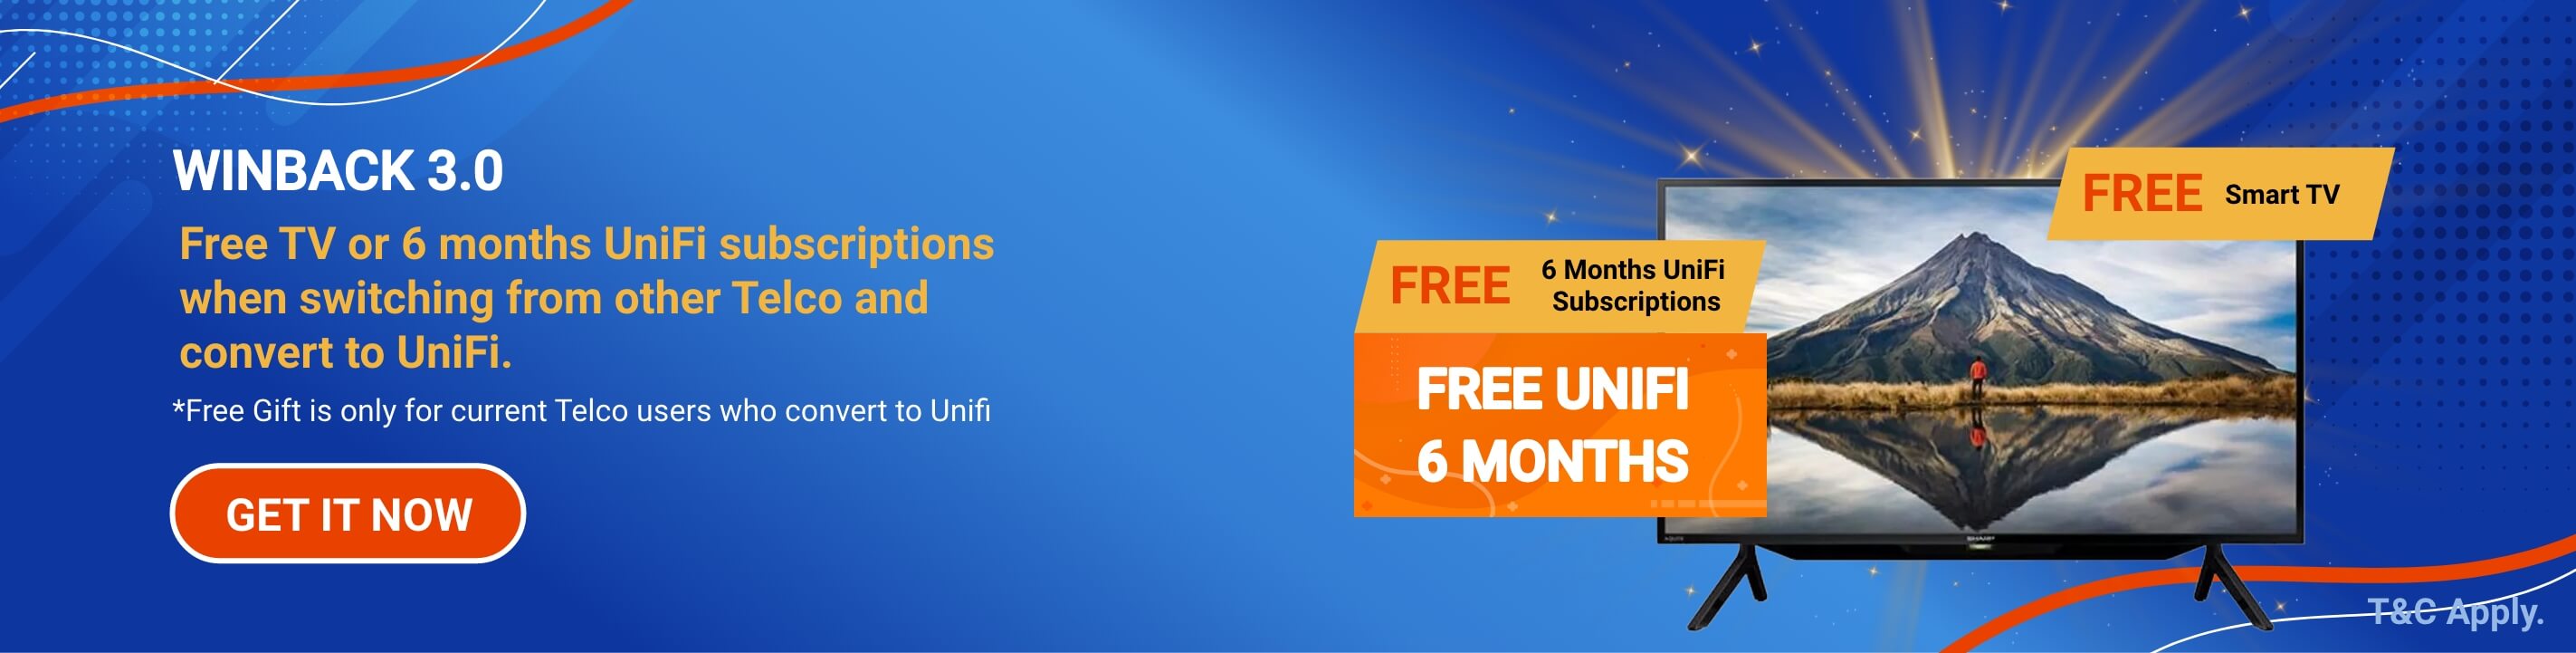 WINBACK 3.0 - Free TV or 6 months unifi subscriptions